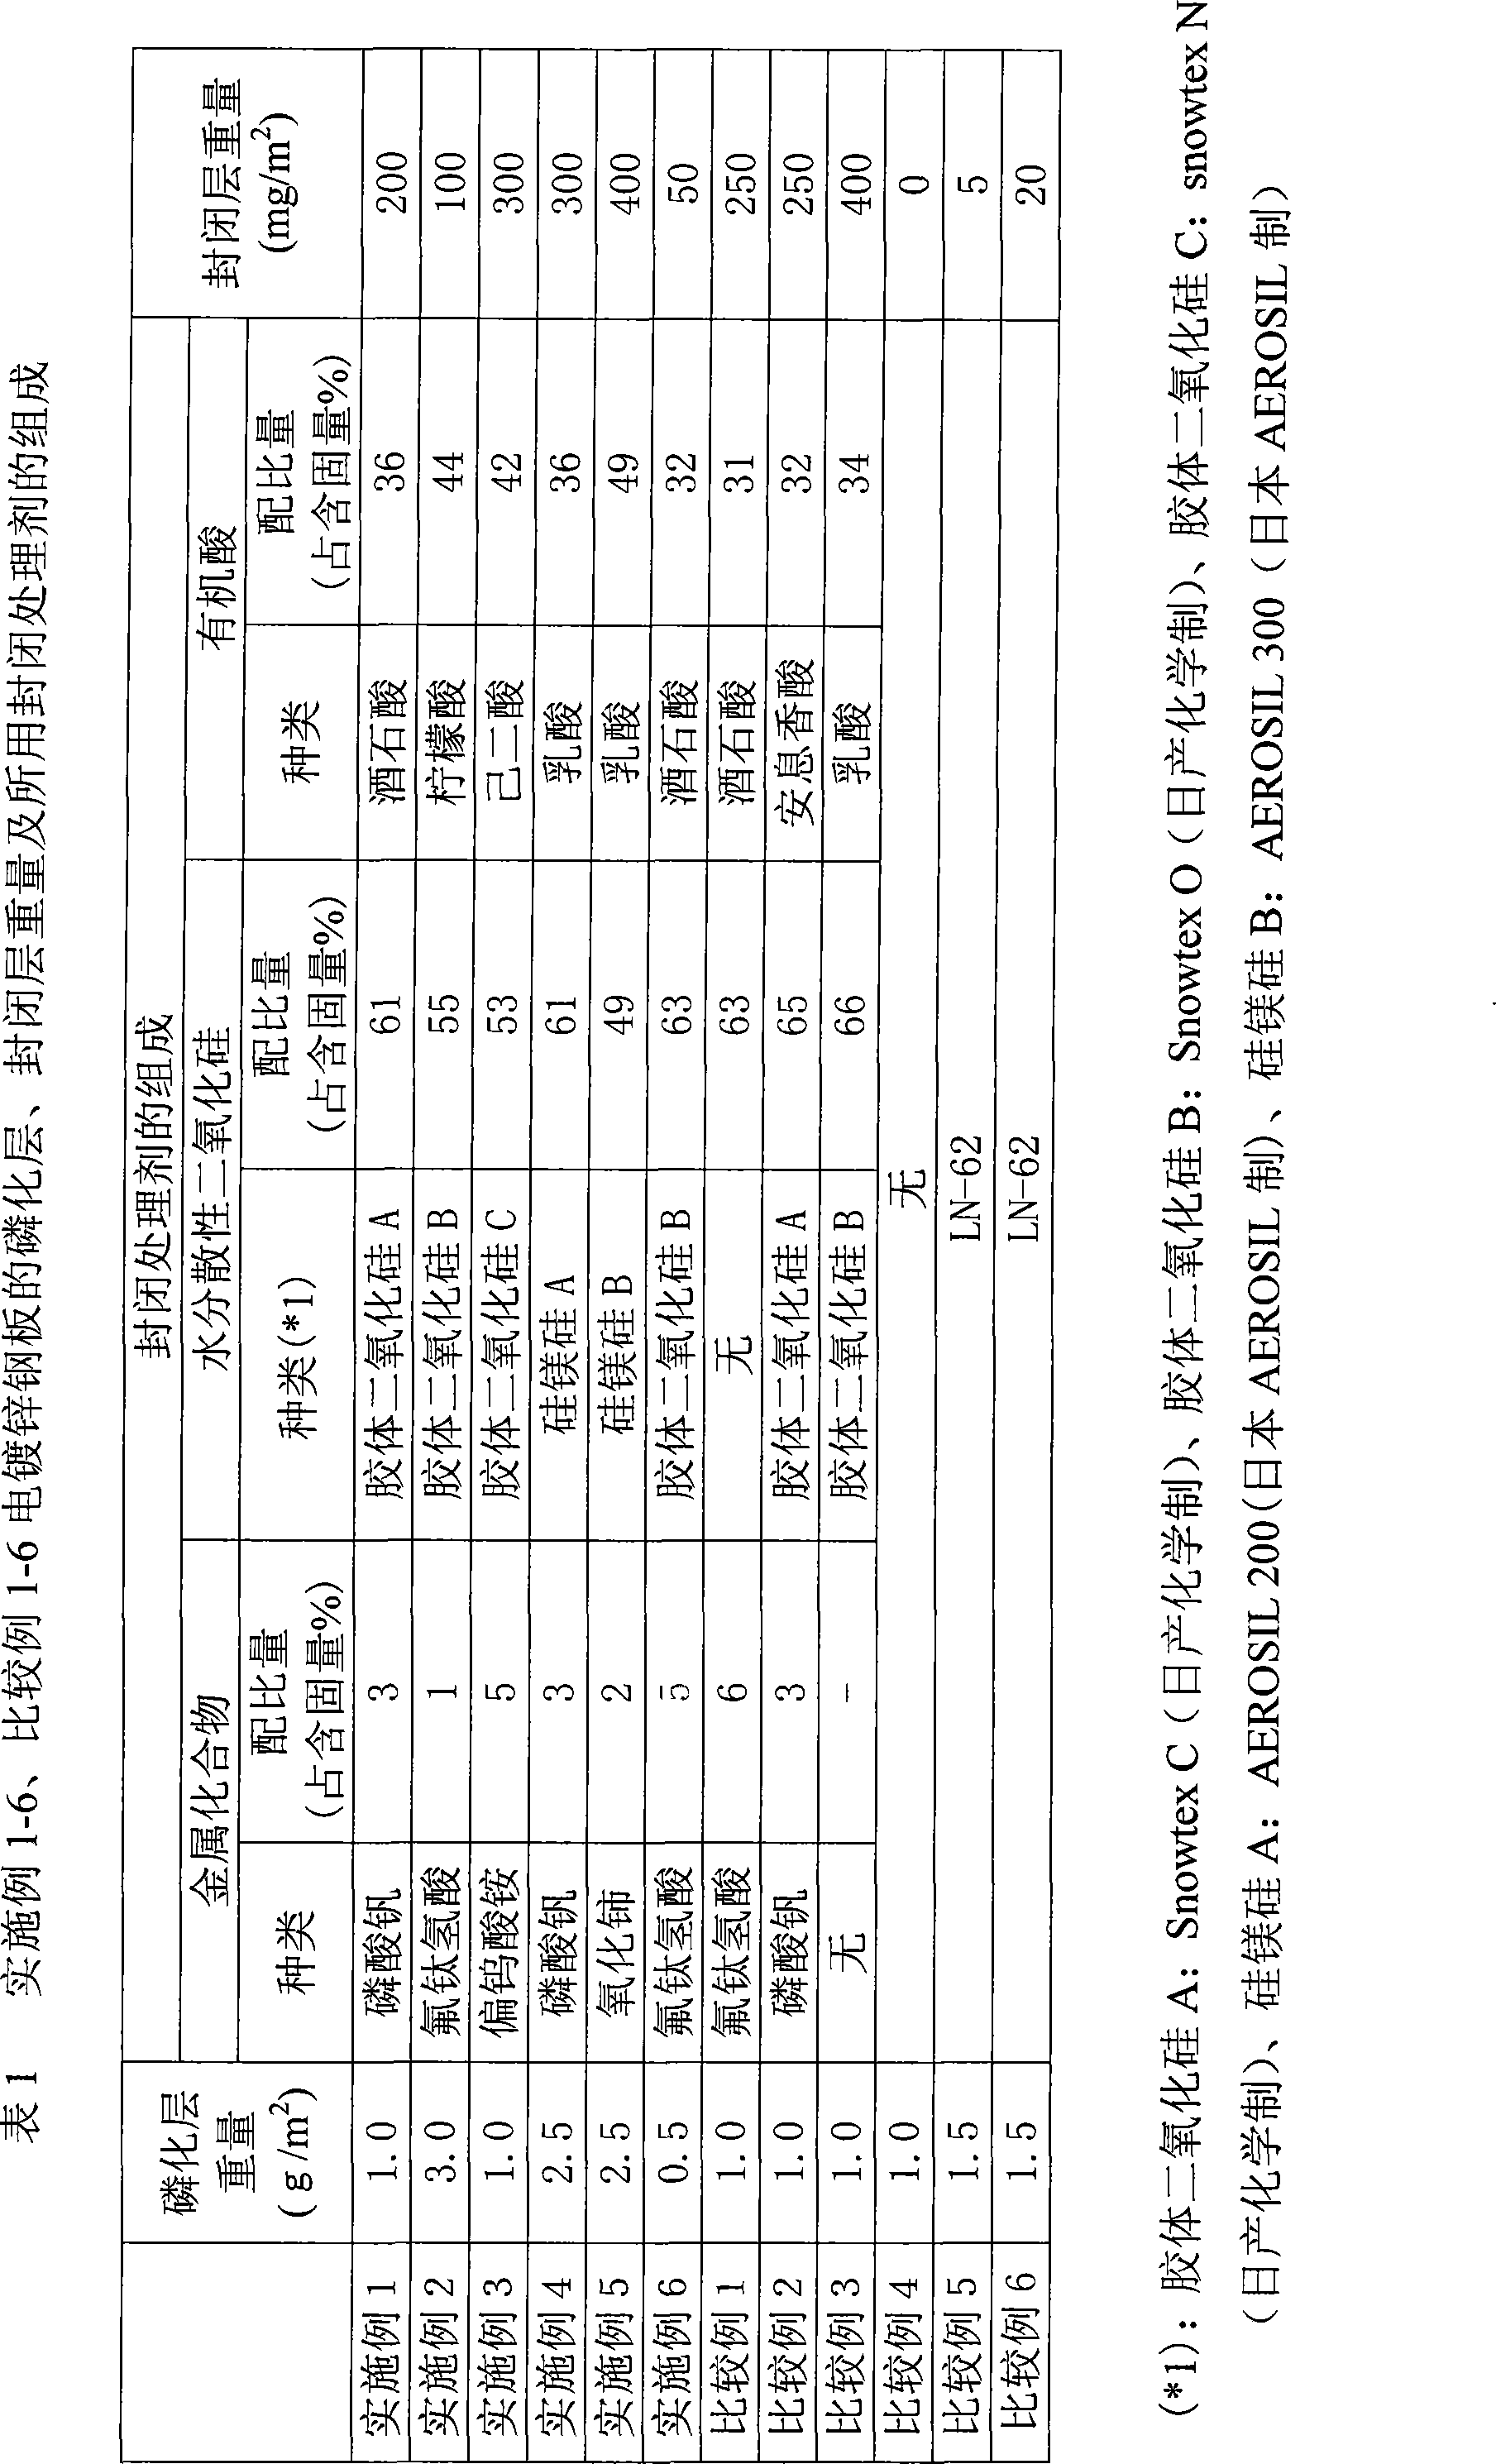 Environmental-friendly chrome-free phosphating electrogalvanized sealed steel sheet and manufacturing method thereof